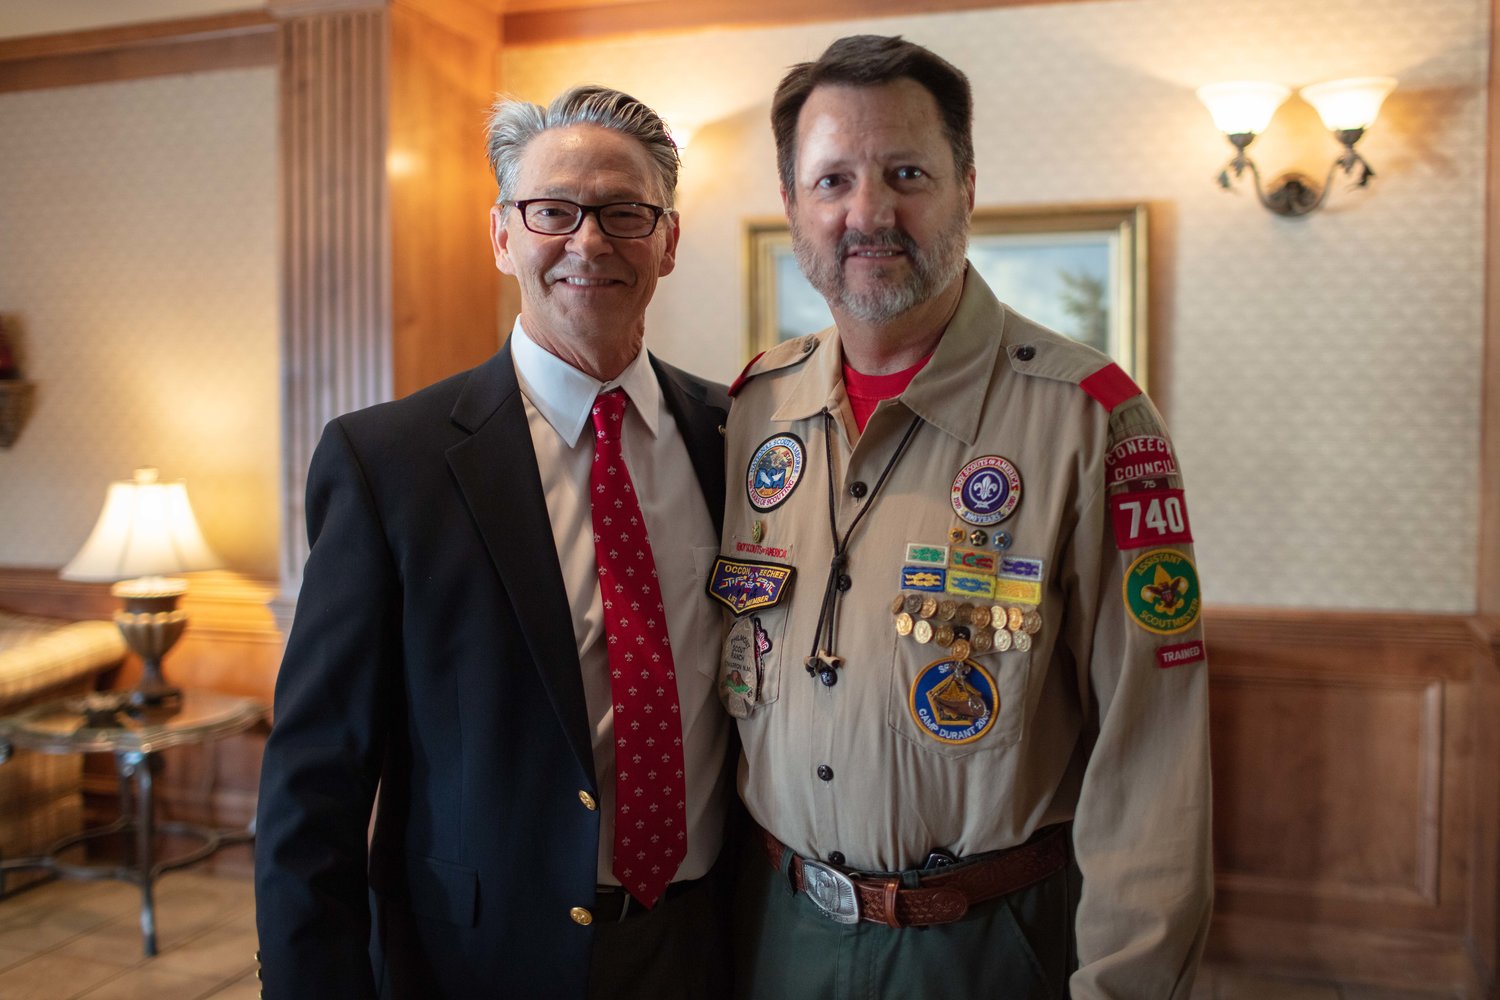 Bill Walters and Judge Jim Ammons, an assistant scoutmaster with Troop 740.